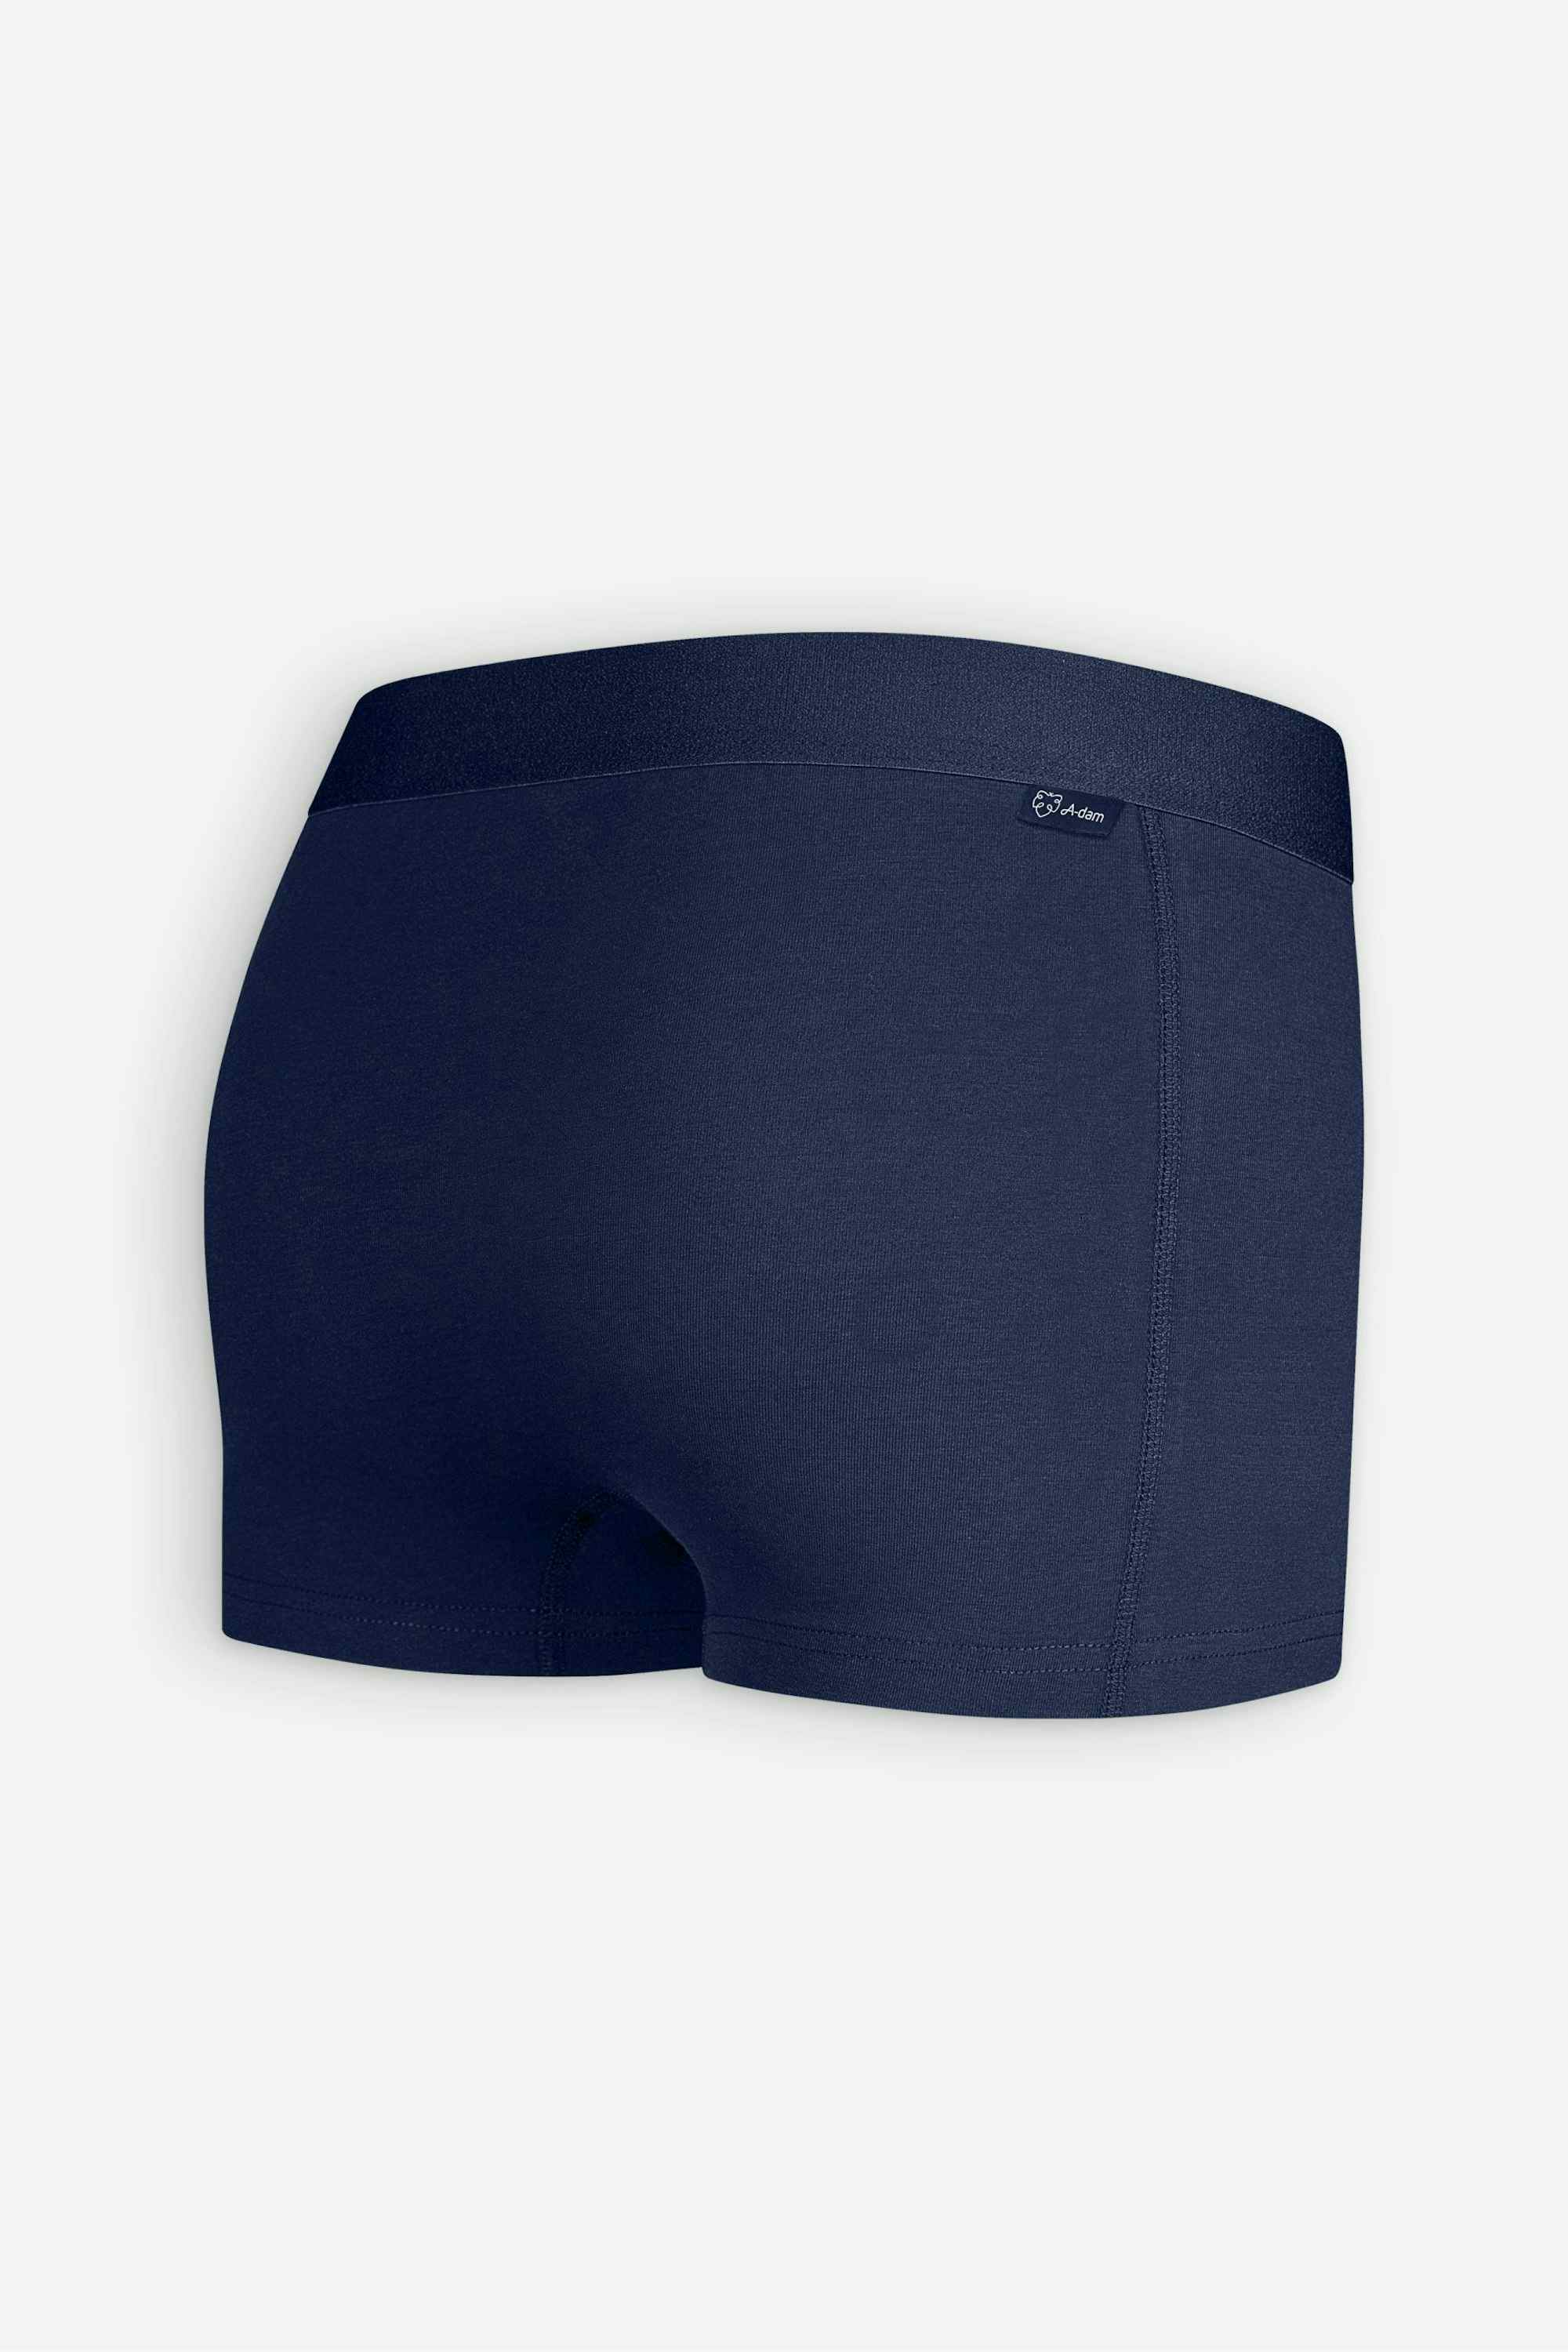 Solid Navy Trunk